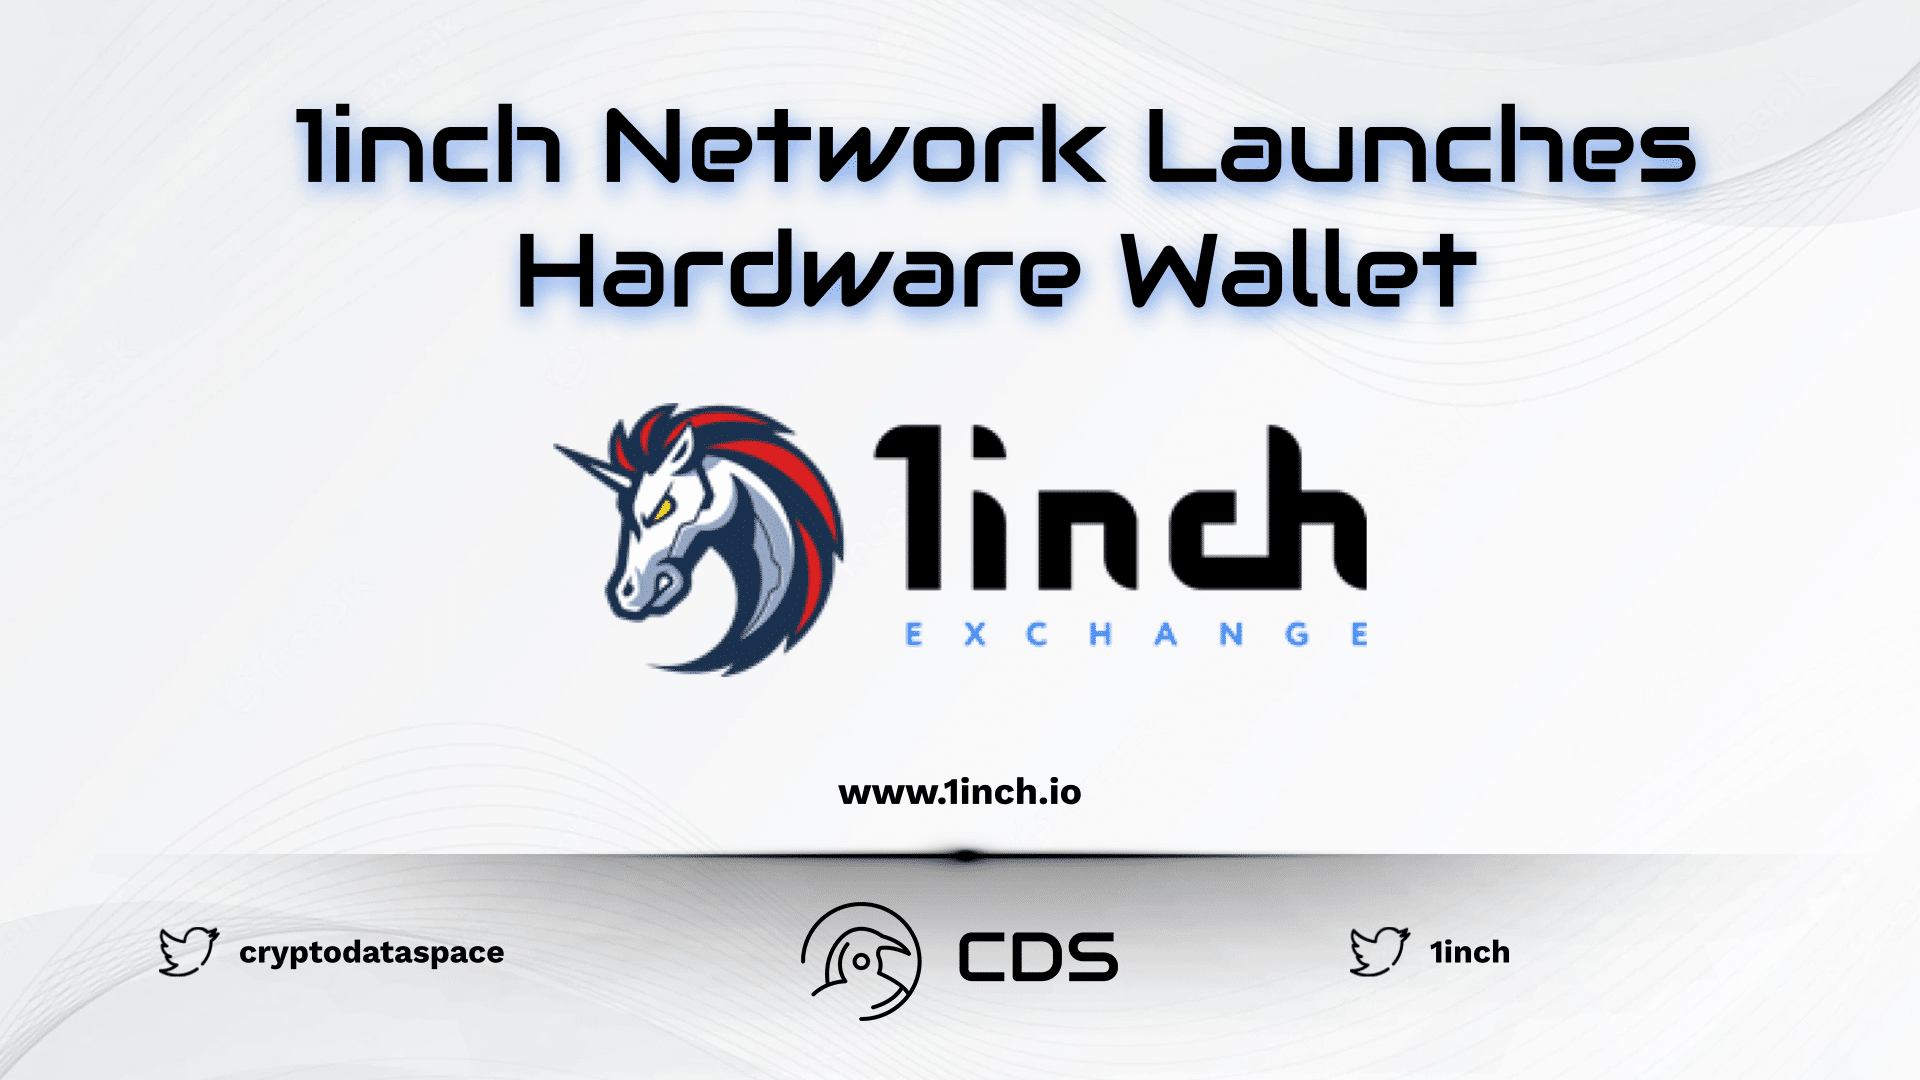 1inch Network Launches Hardware Wallet